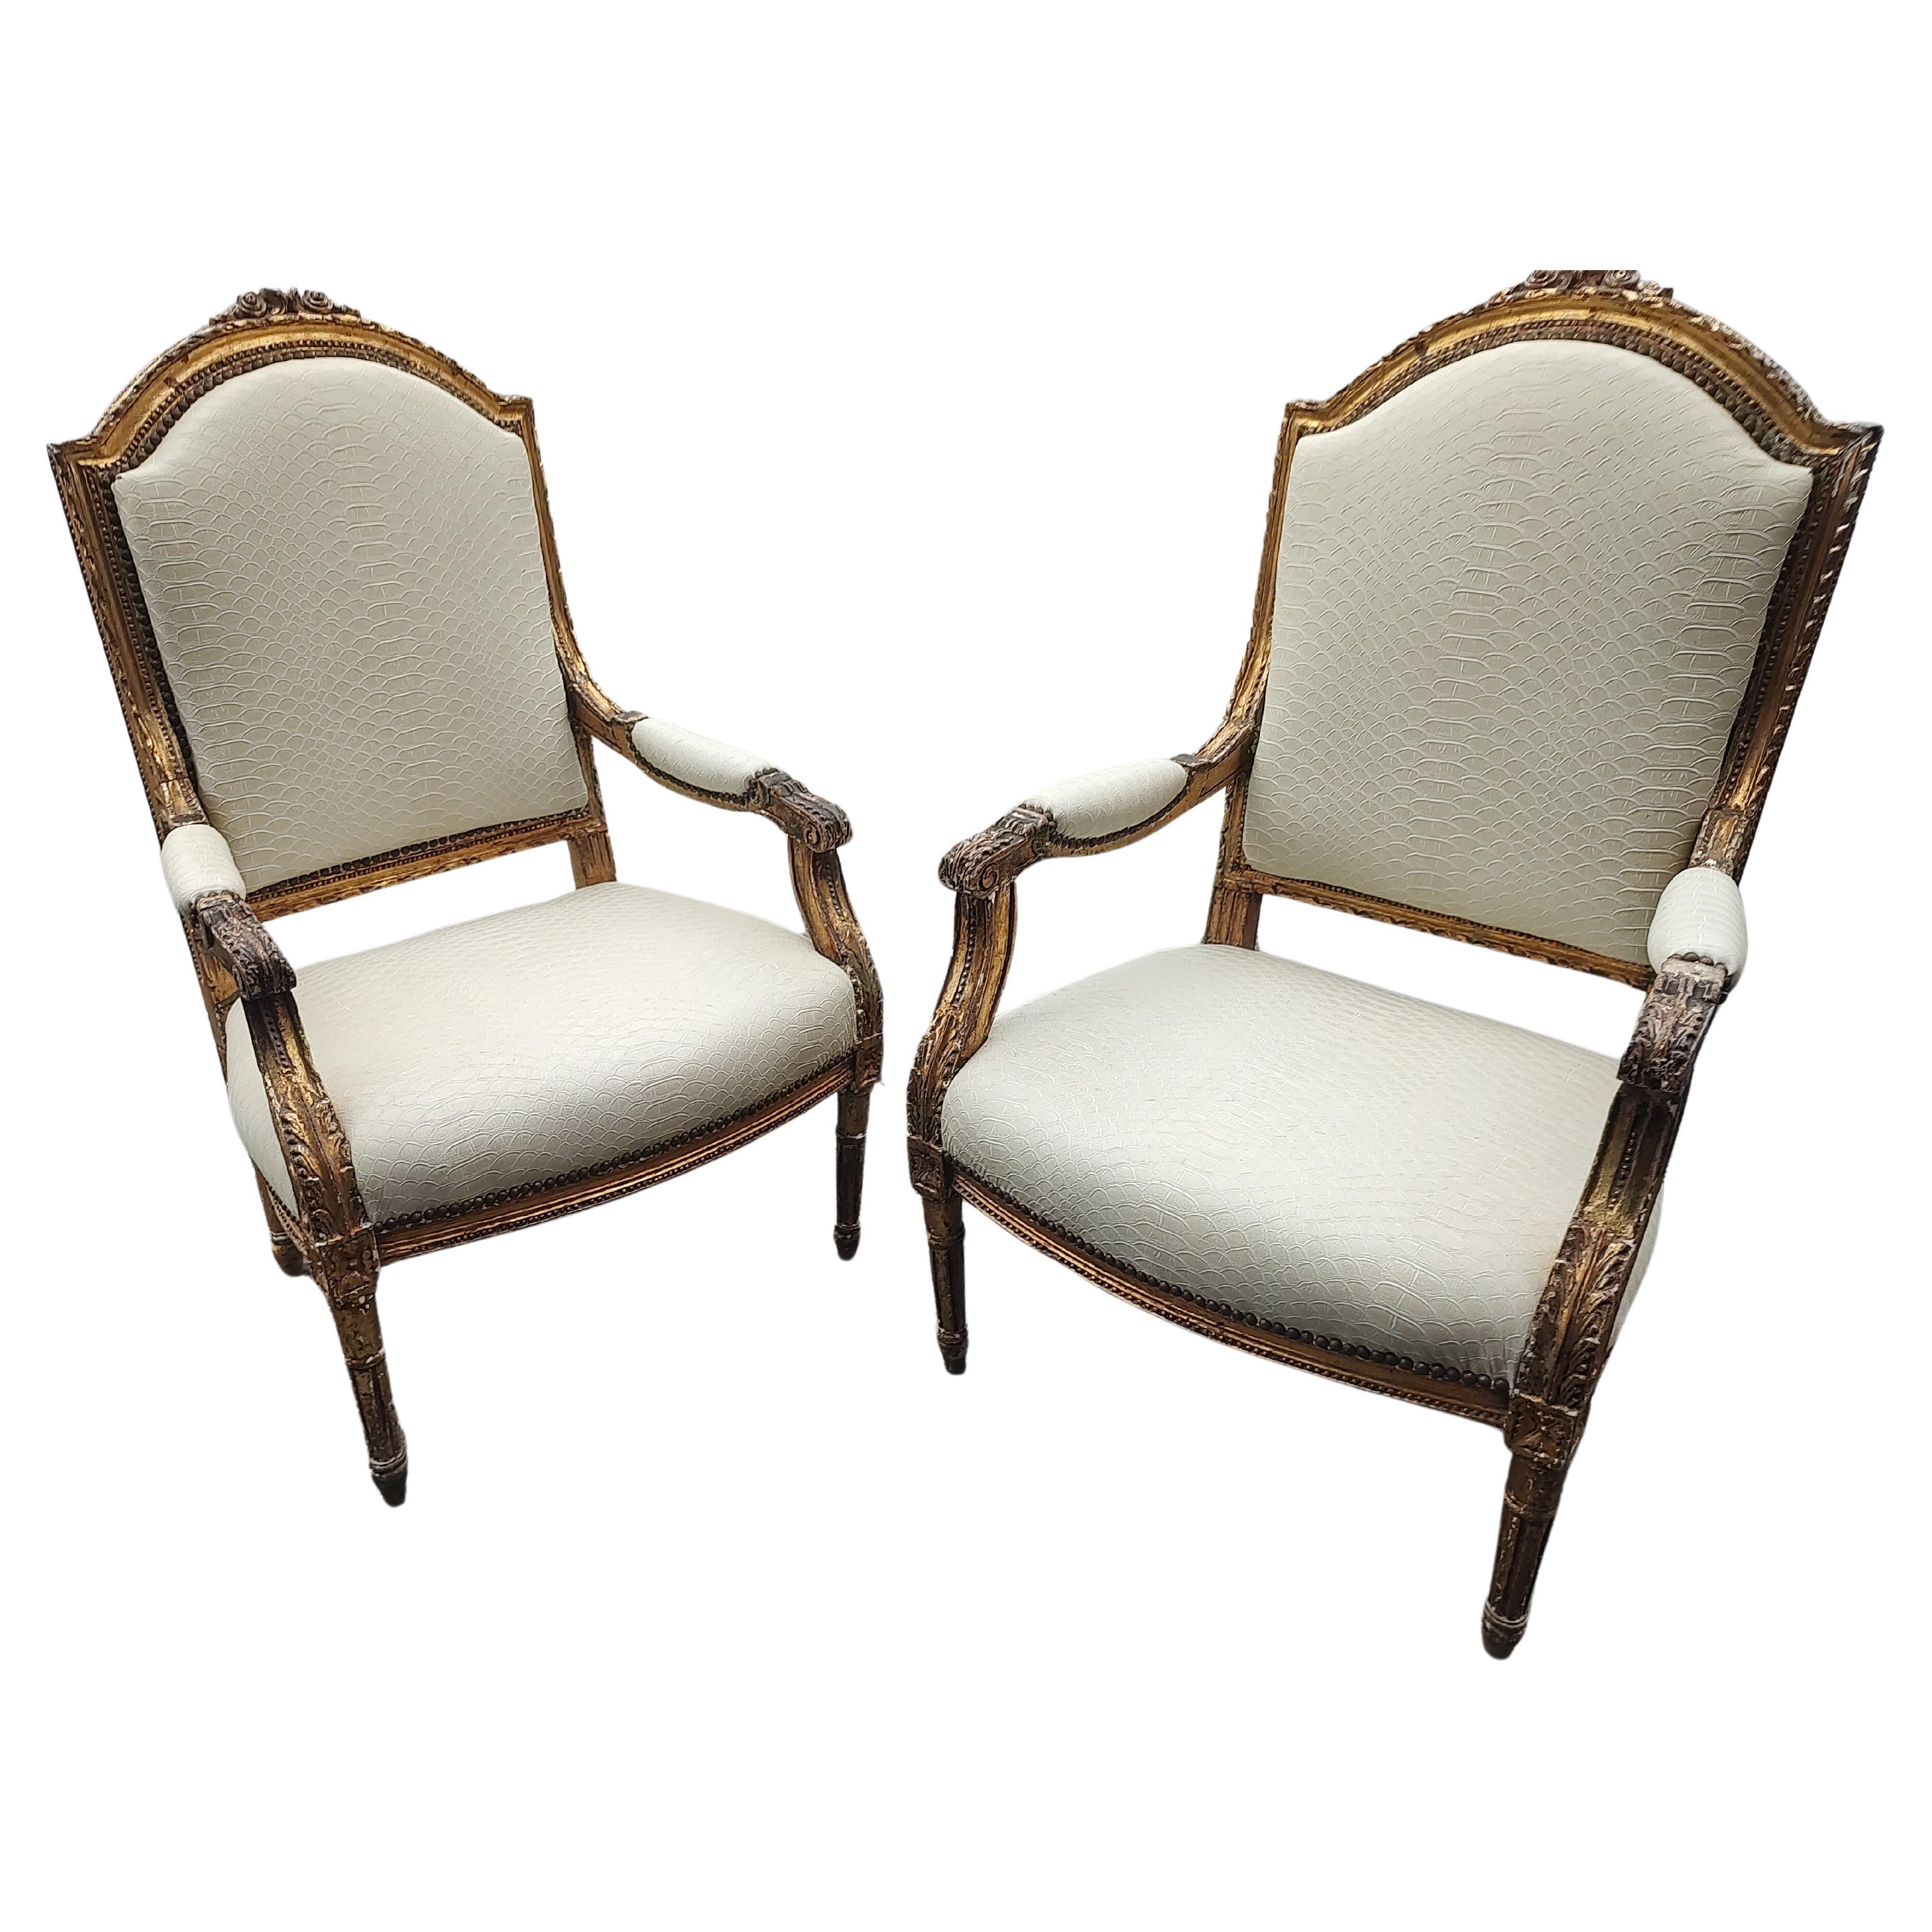 Pair of Mid 18th Century Gilt French Armchairs Fauteuils For Sale 9